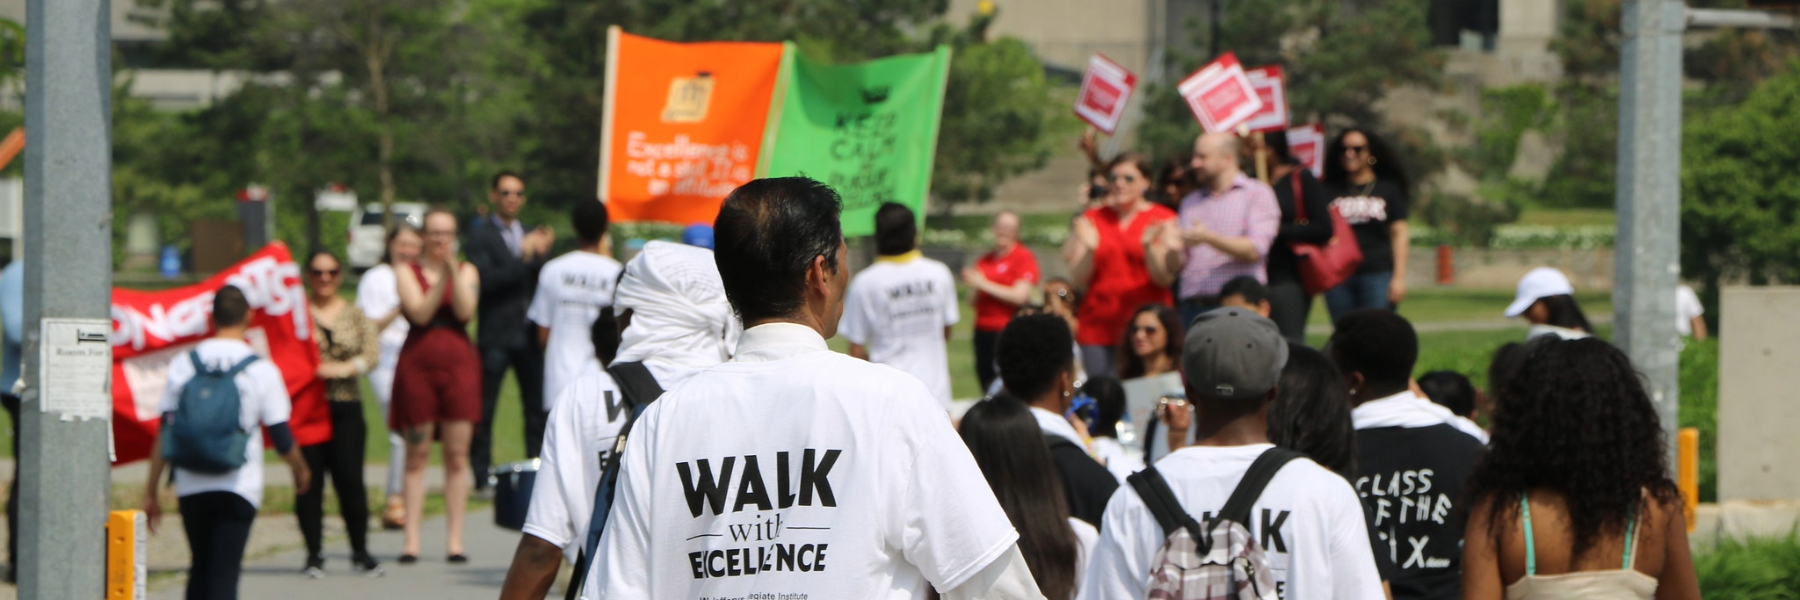 2016 Walk with Excellence